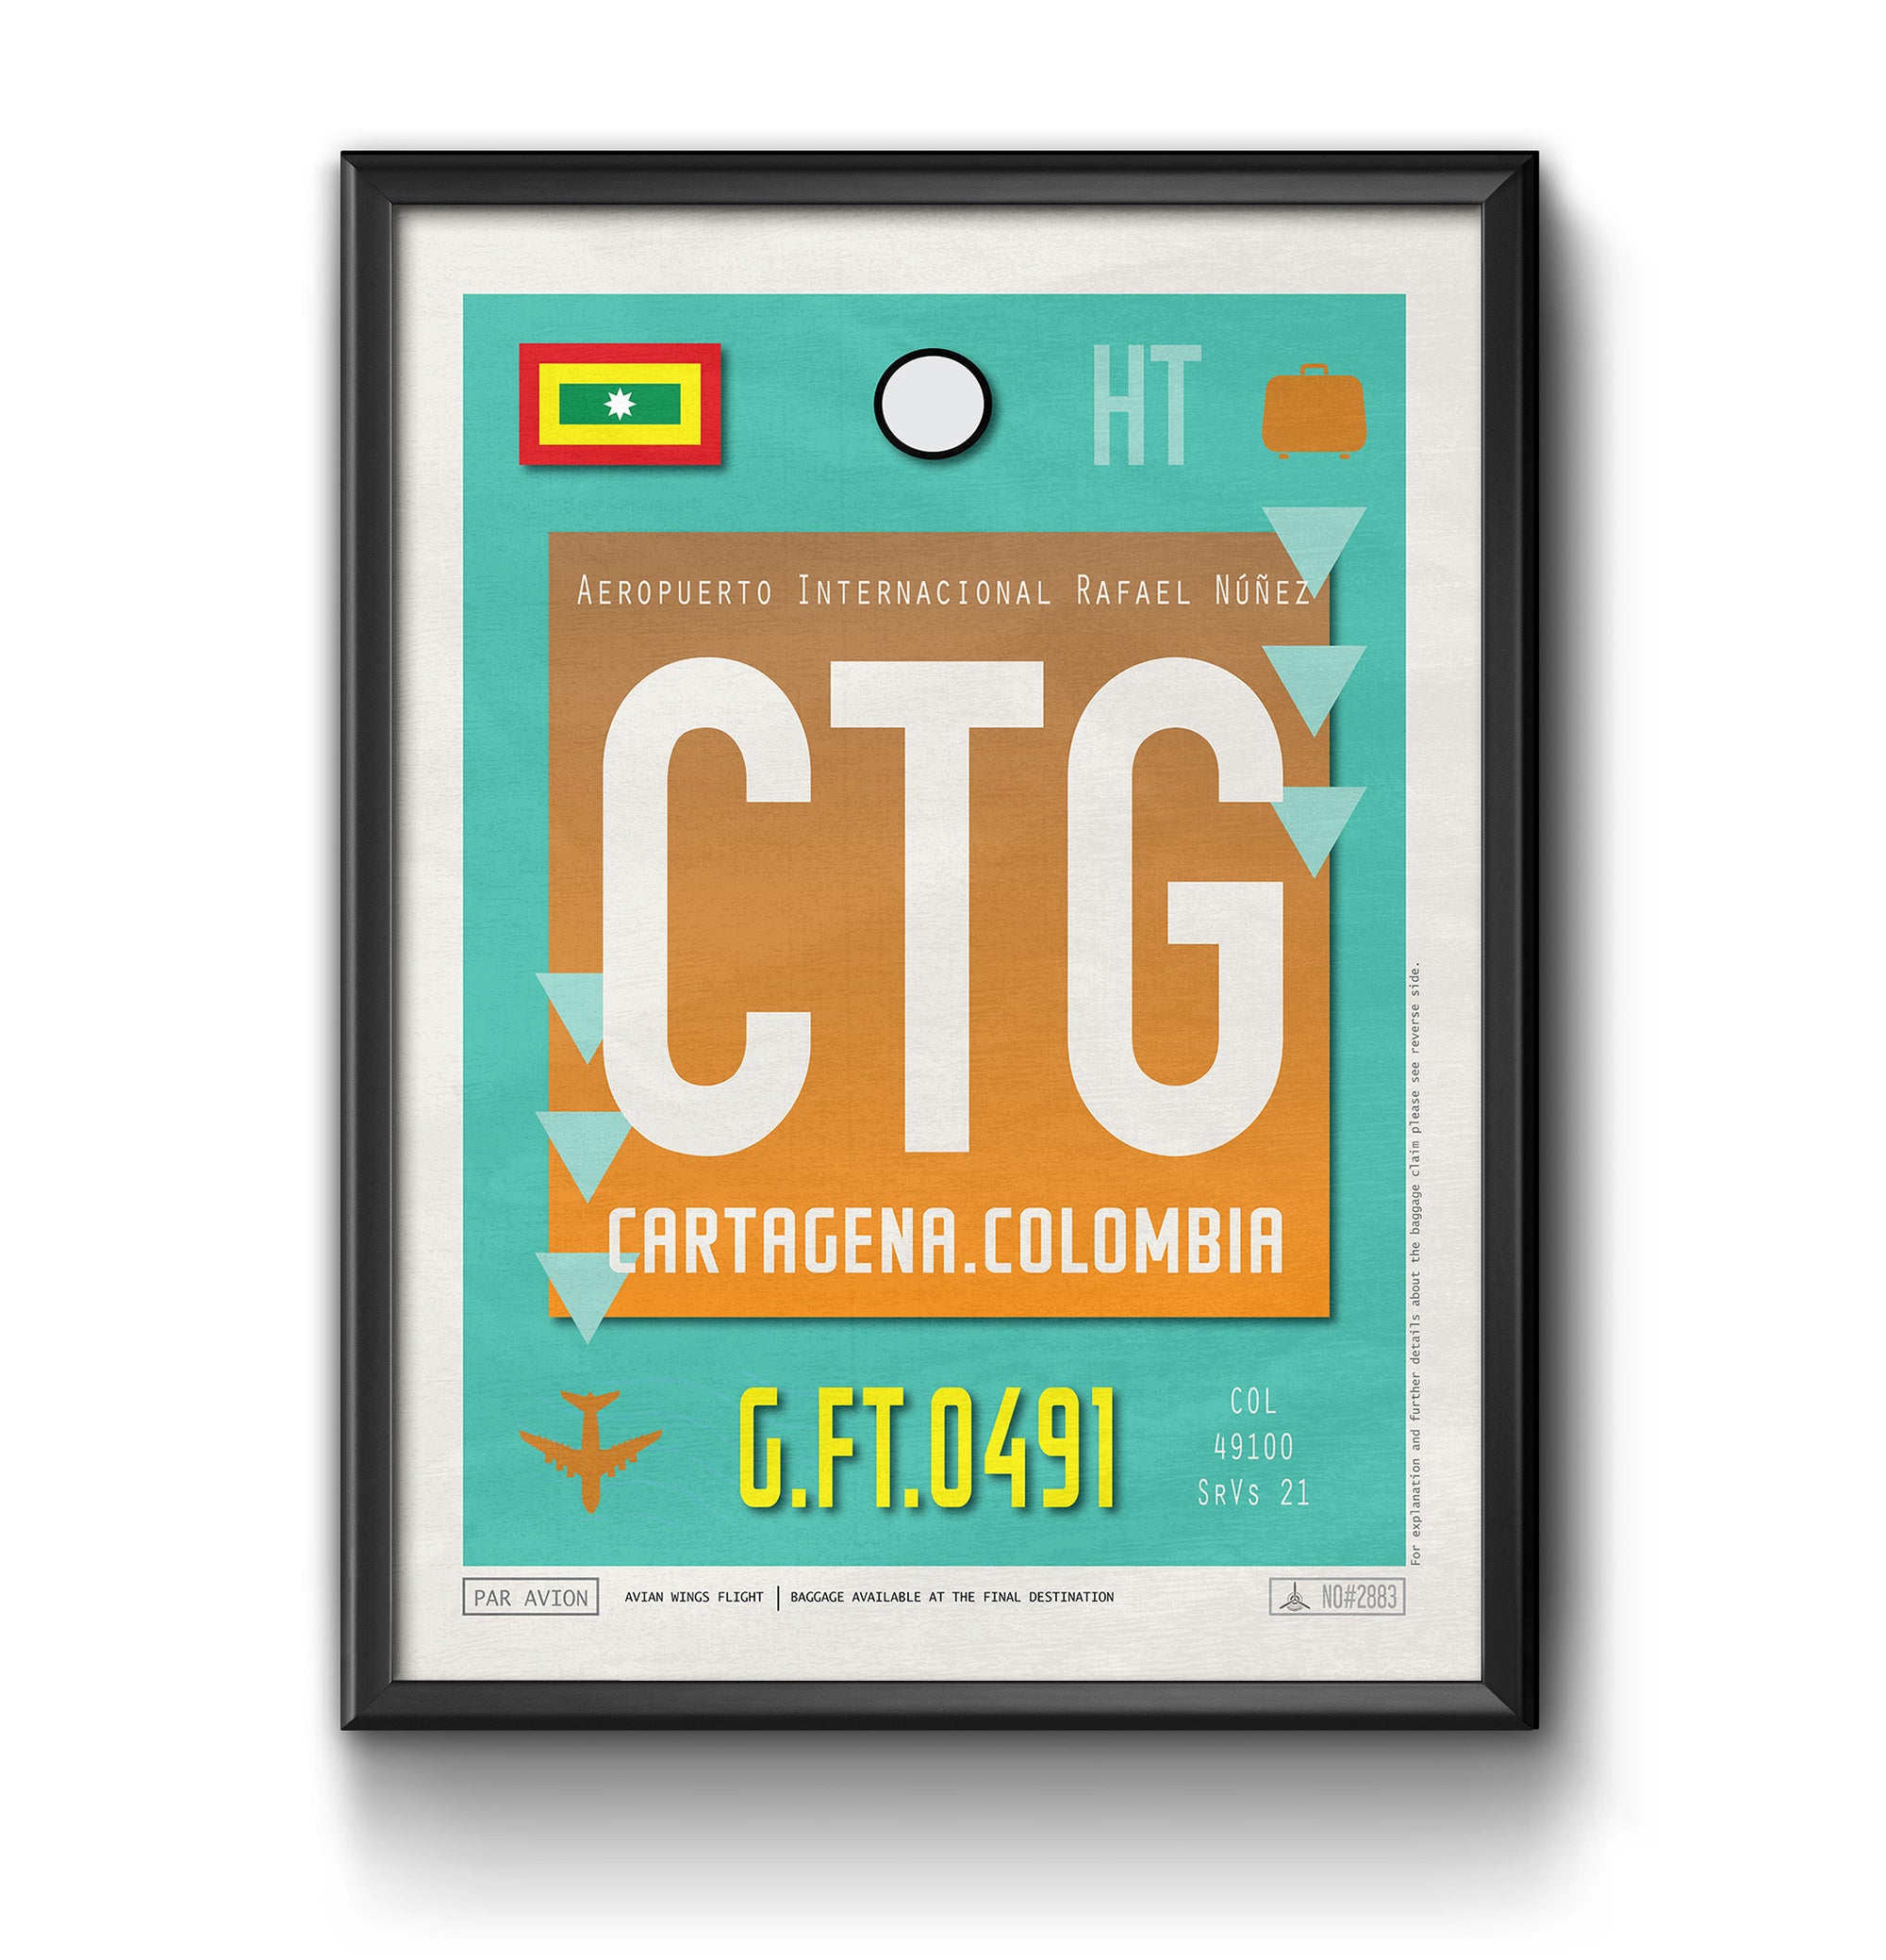 Cartagena, Colombia - CTG Airport Code Poster